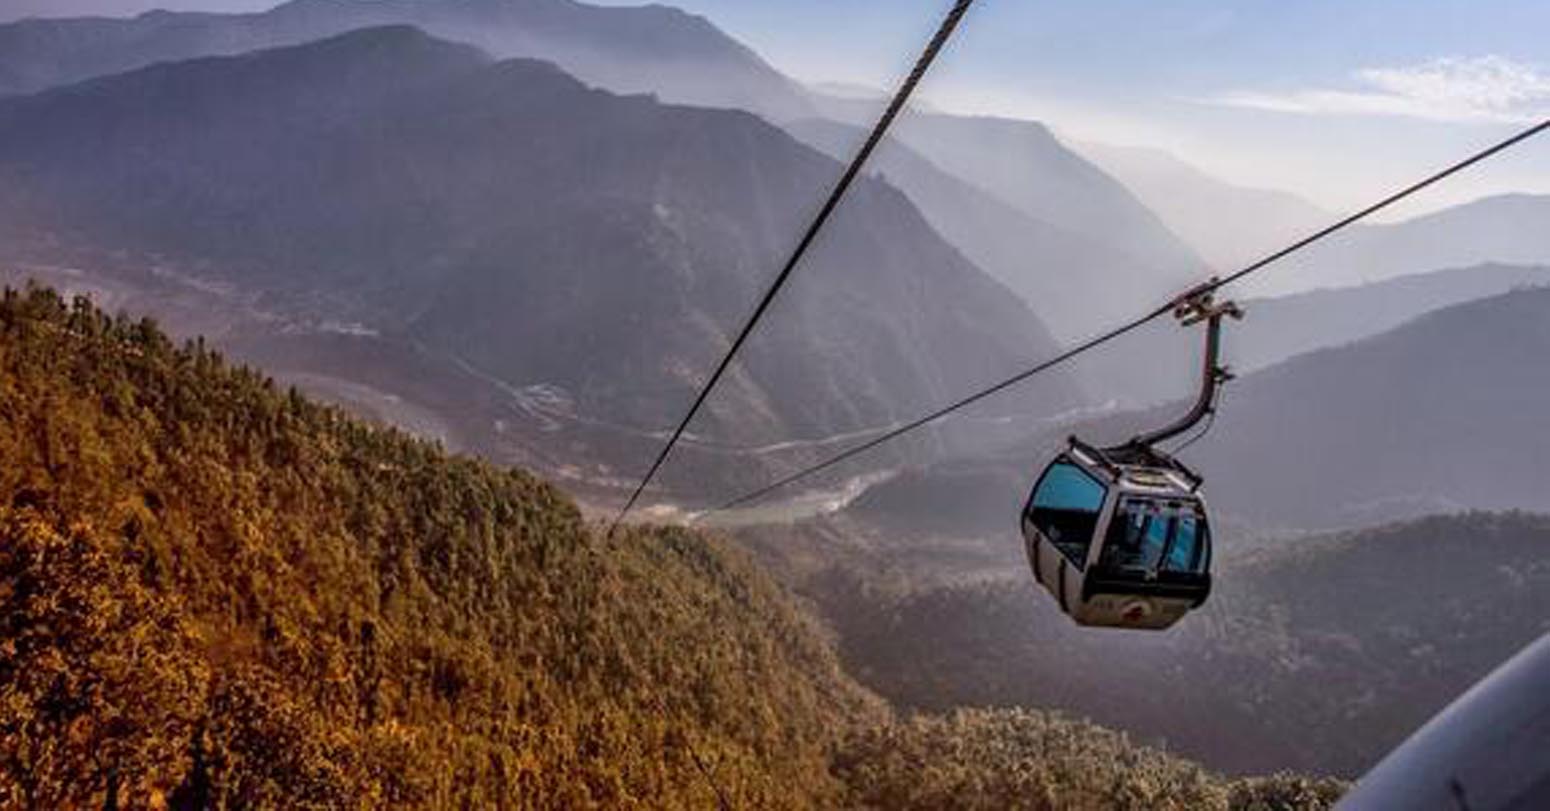 Cable Car in Nepal